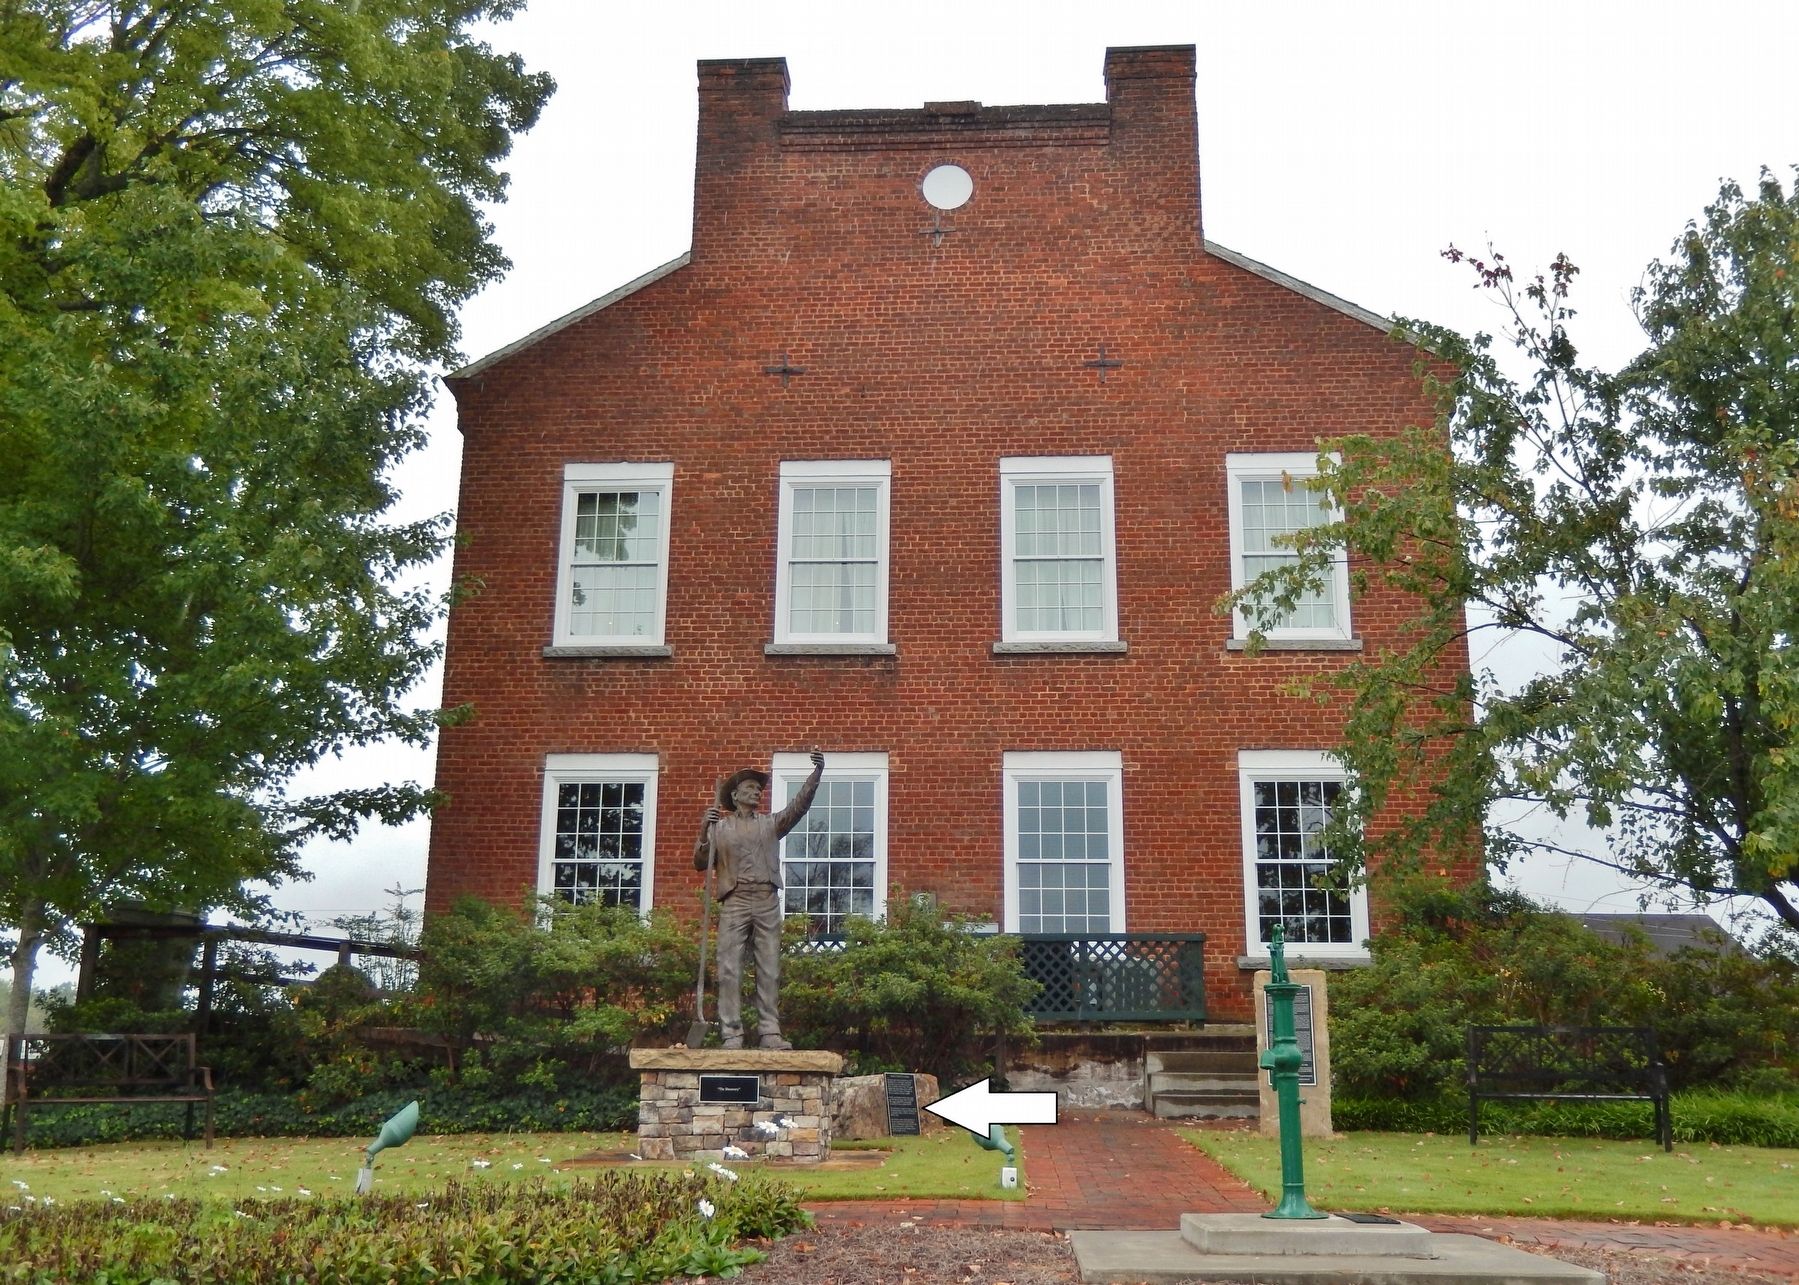 Old White County Courthouse Musuem (<i>north side view; marker visible beside walkway</i>) image. Click for full size.